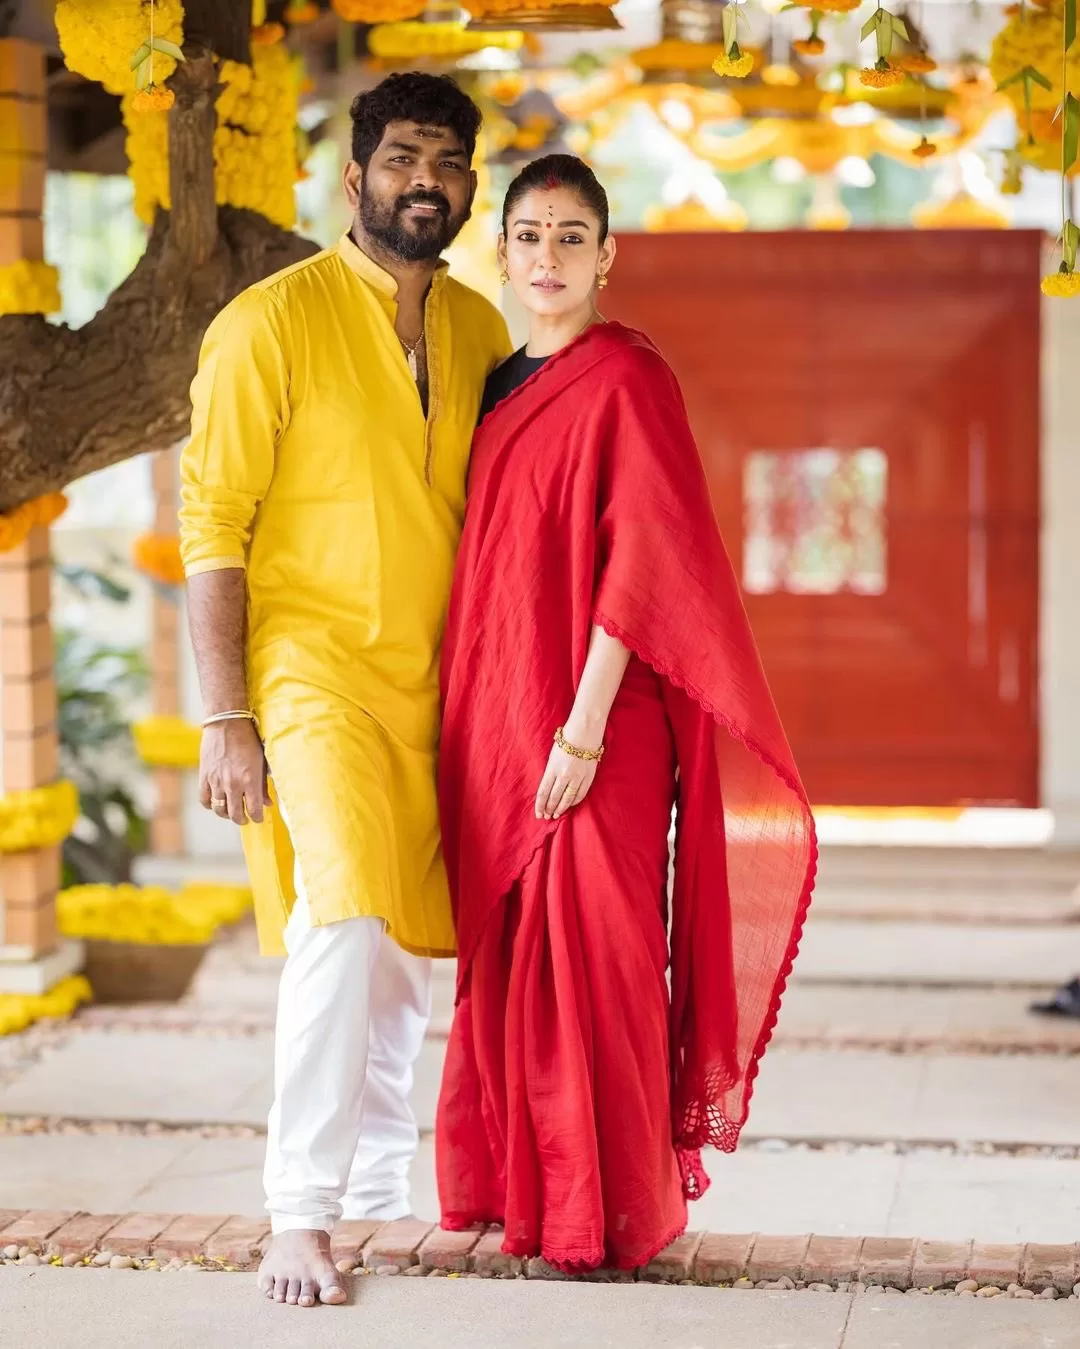 South Actress Nayanthara and Vignesh Shivan's Candid Moment Breaks the Internet: 